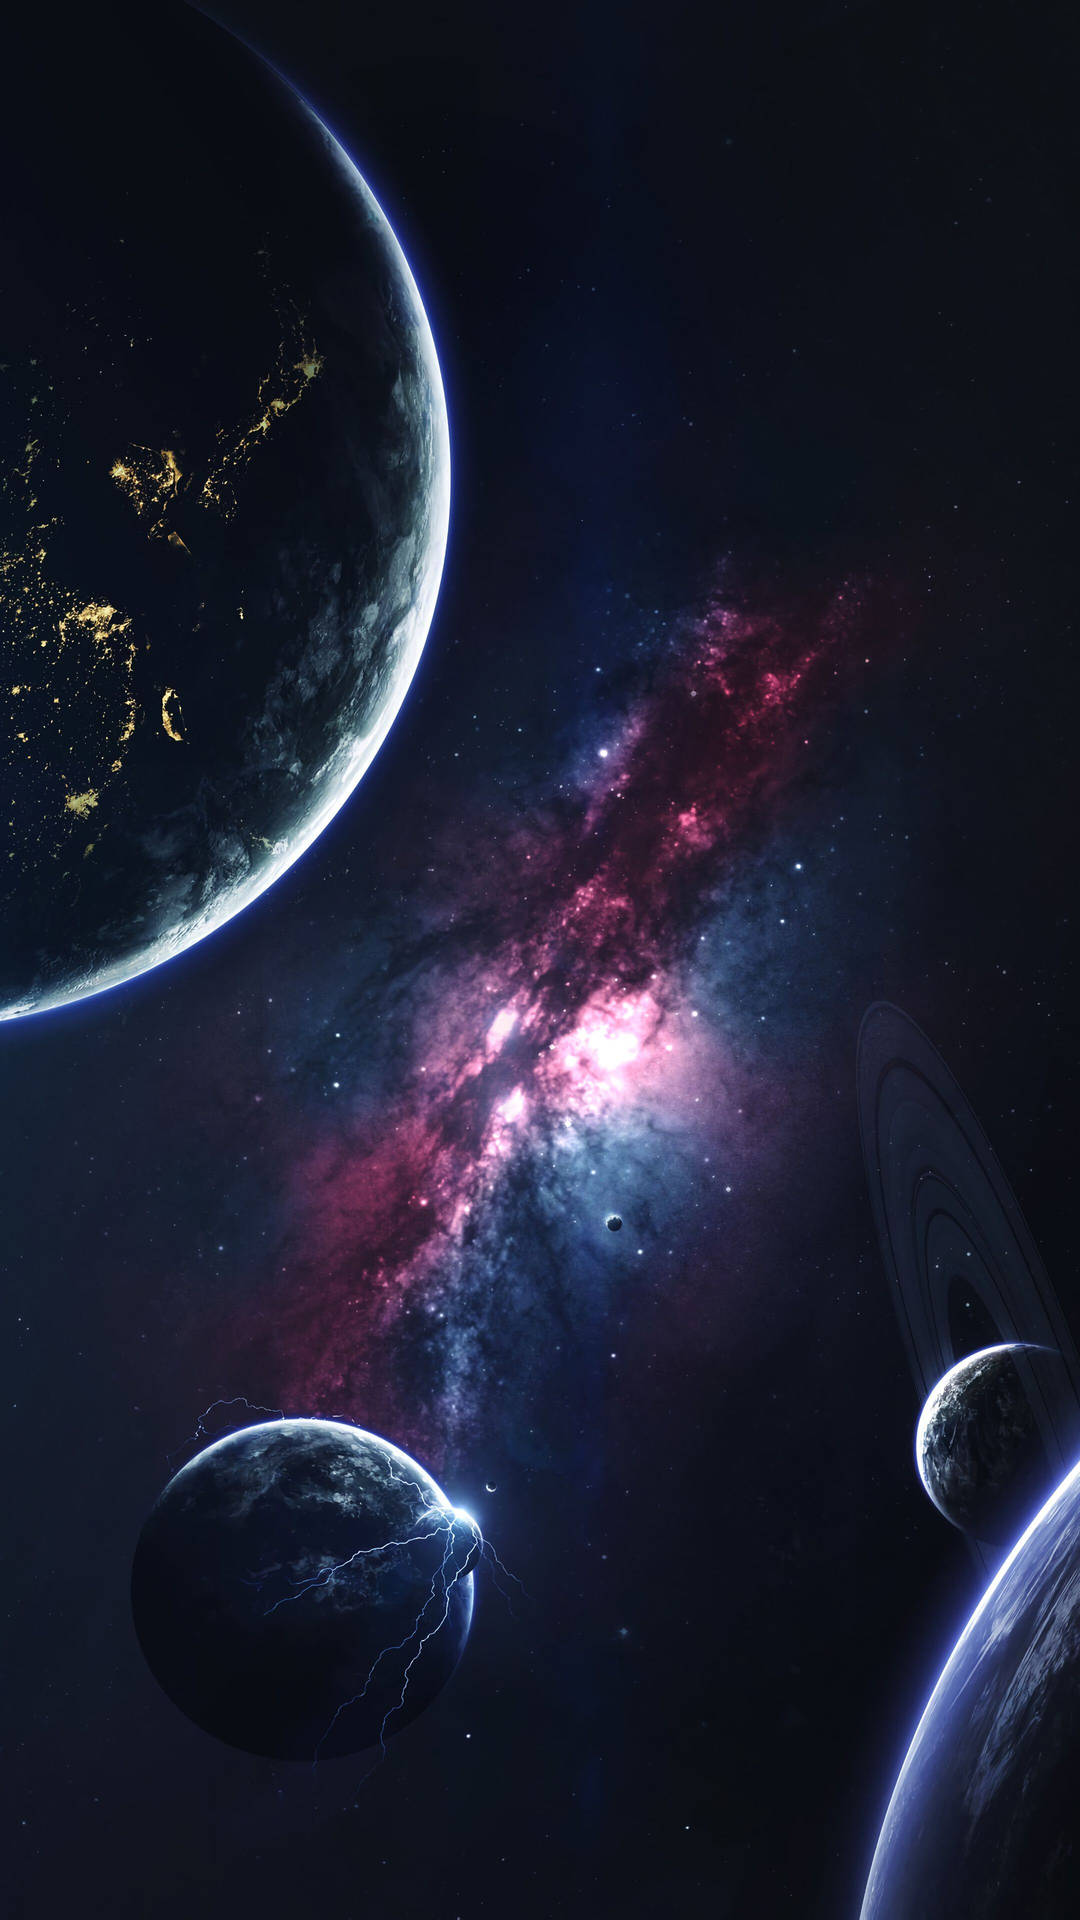 4k Phone Background Planets In Galaxy Wallpaper